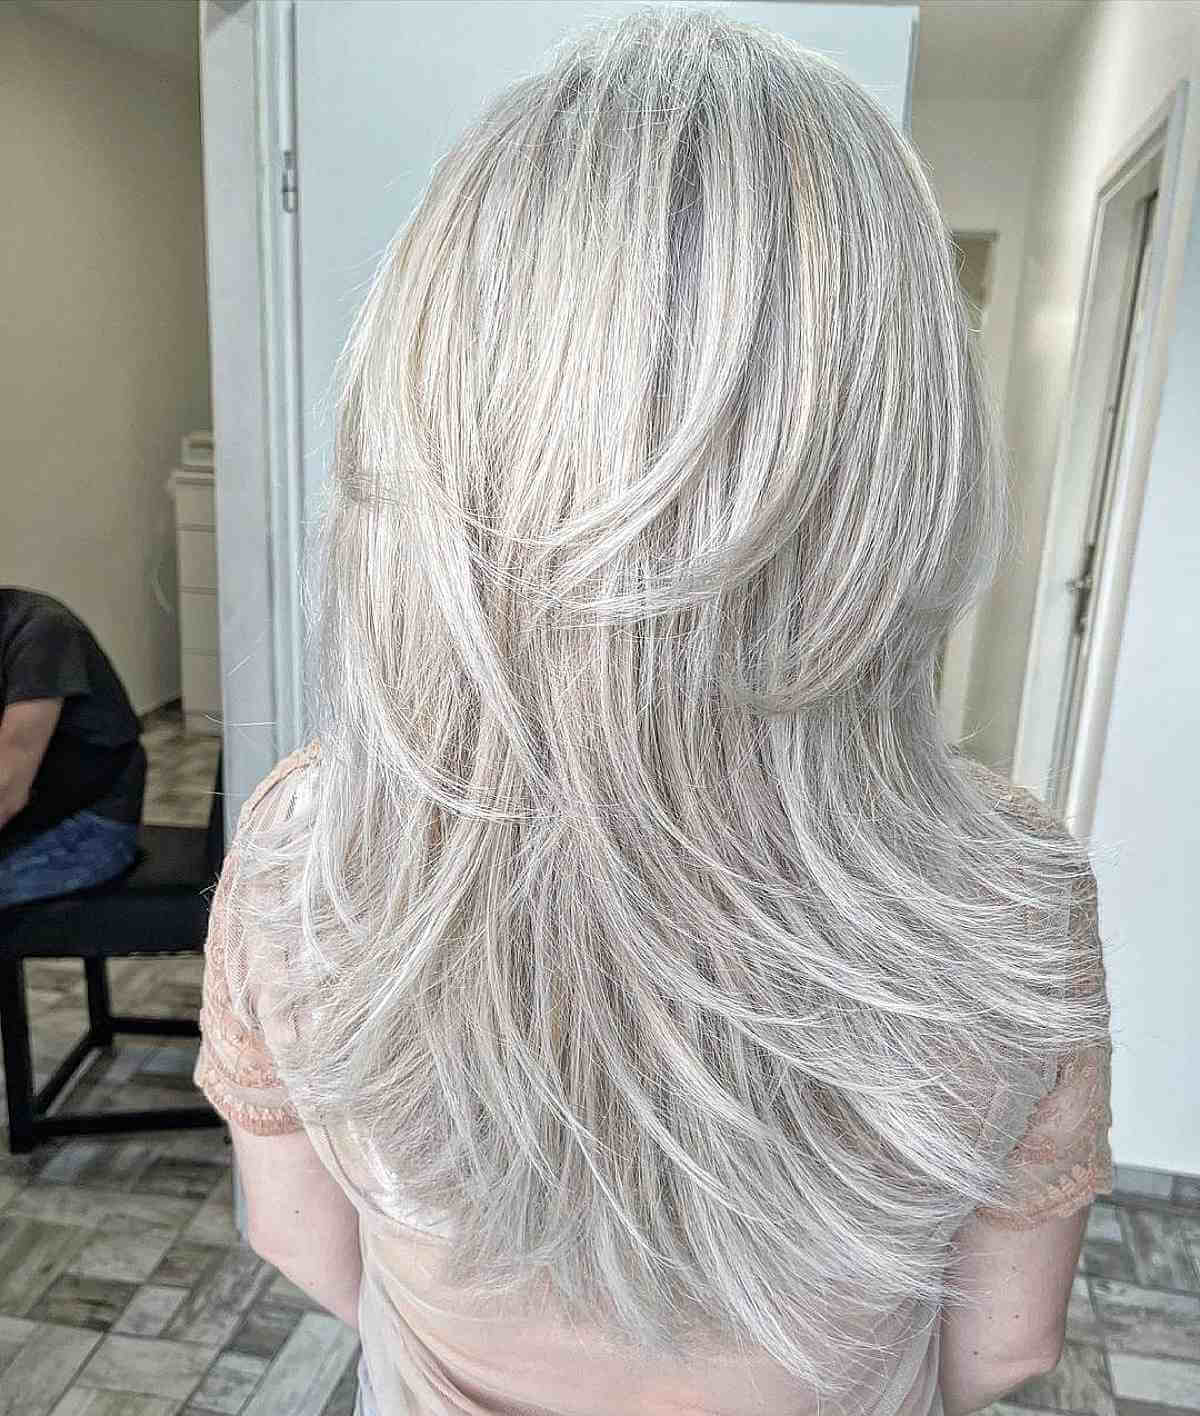 Long Platinum Hair with Short Layers